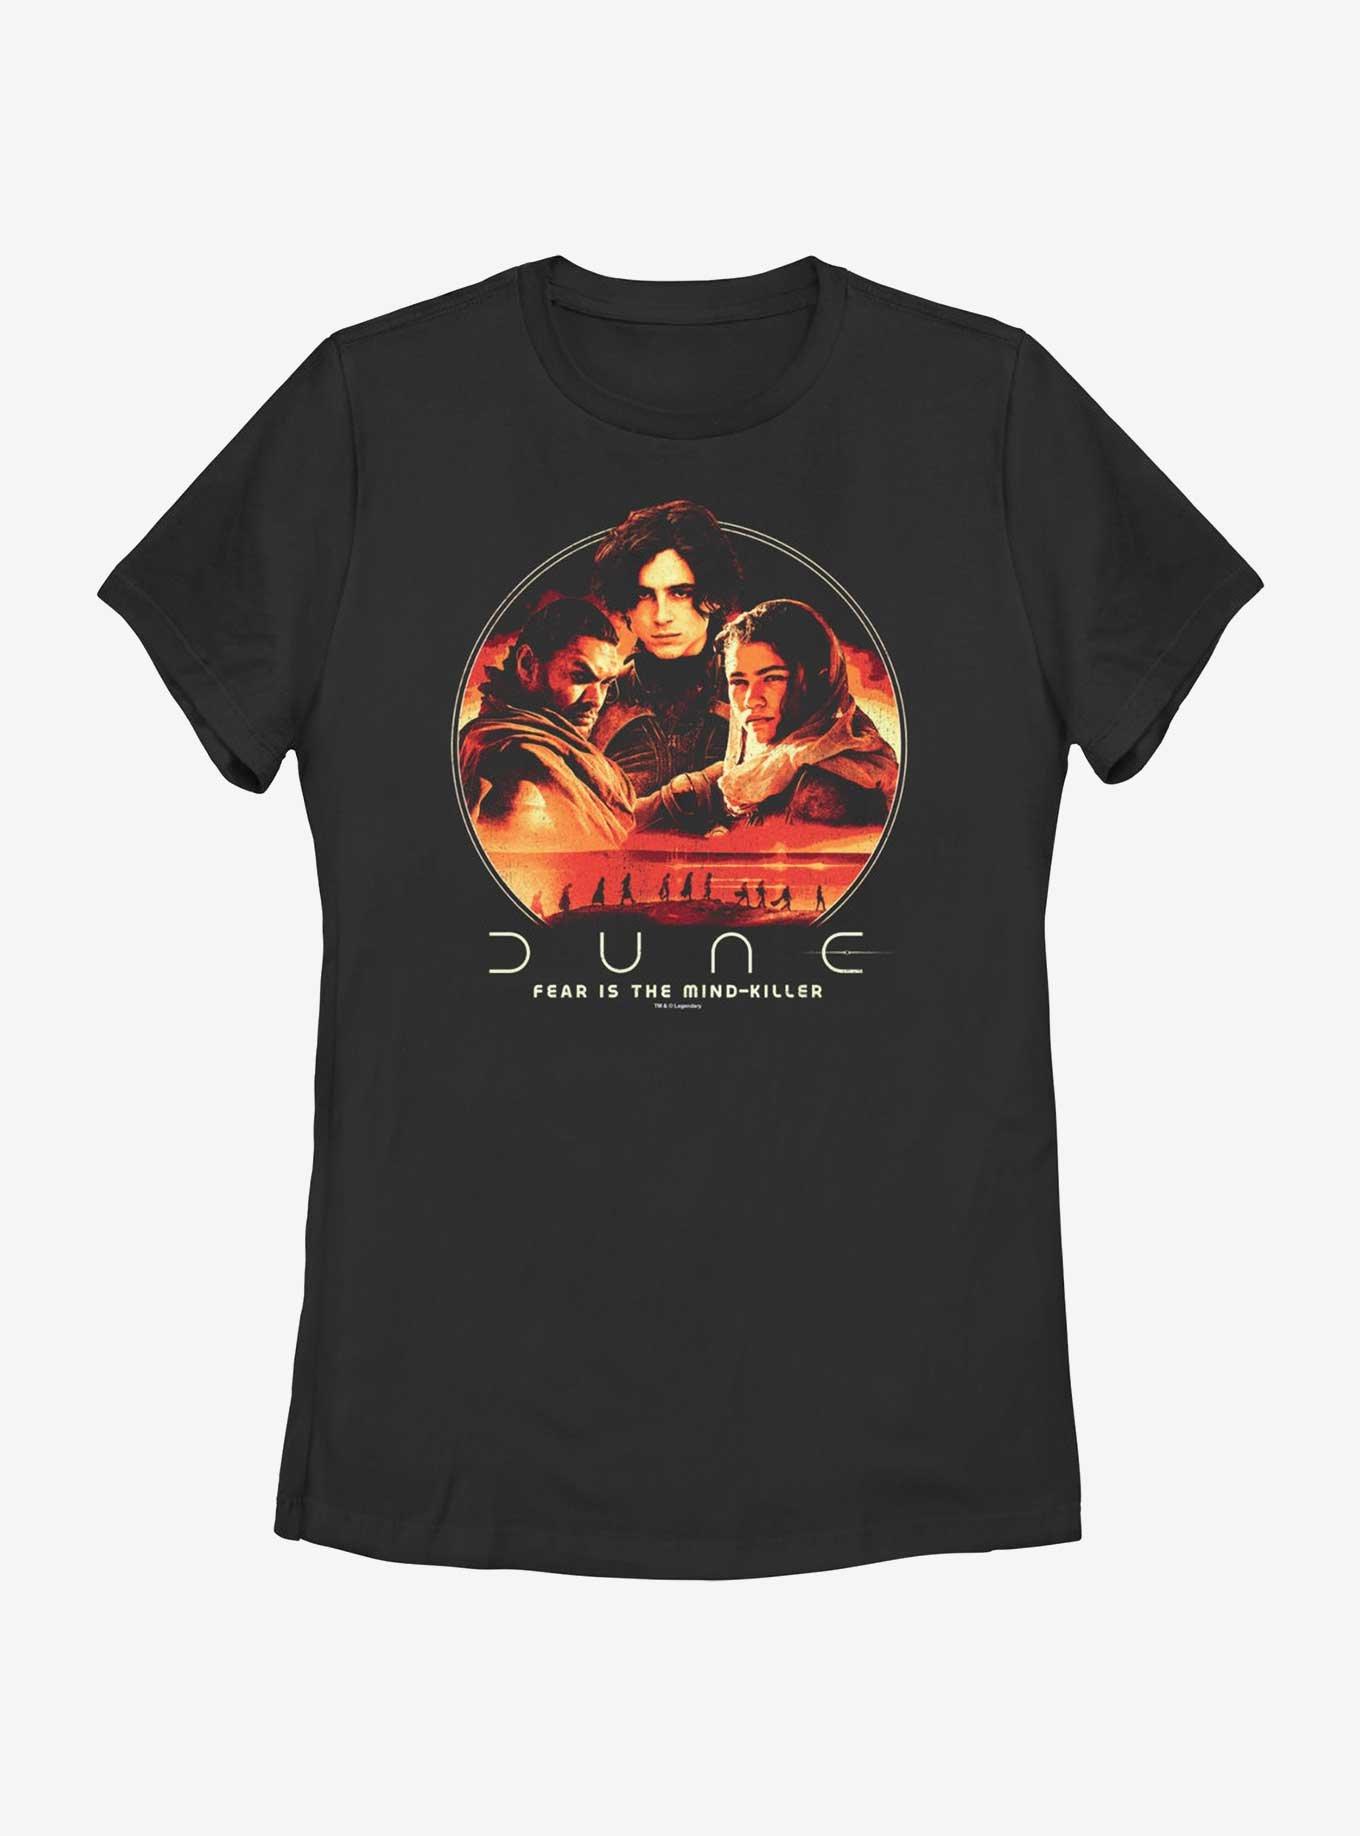 Dune: Part Two Fear Is The Mind-Killer Womens T-Shirt, BLACK, hi-res